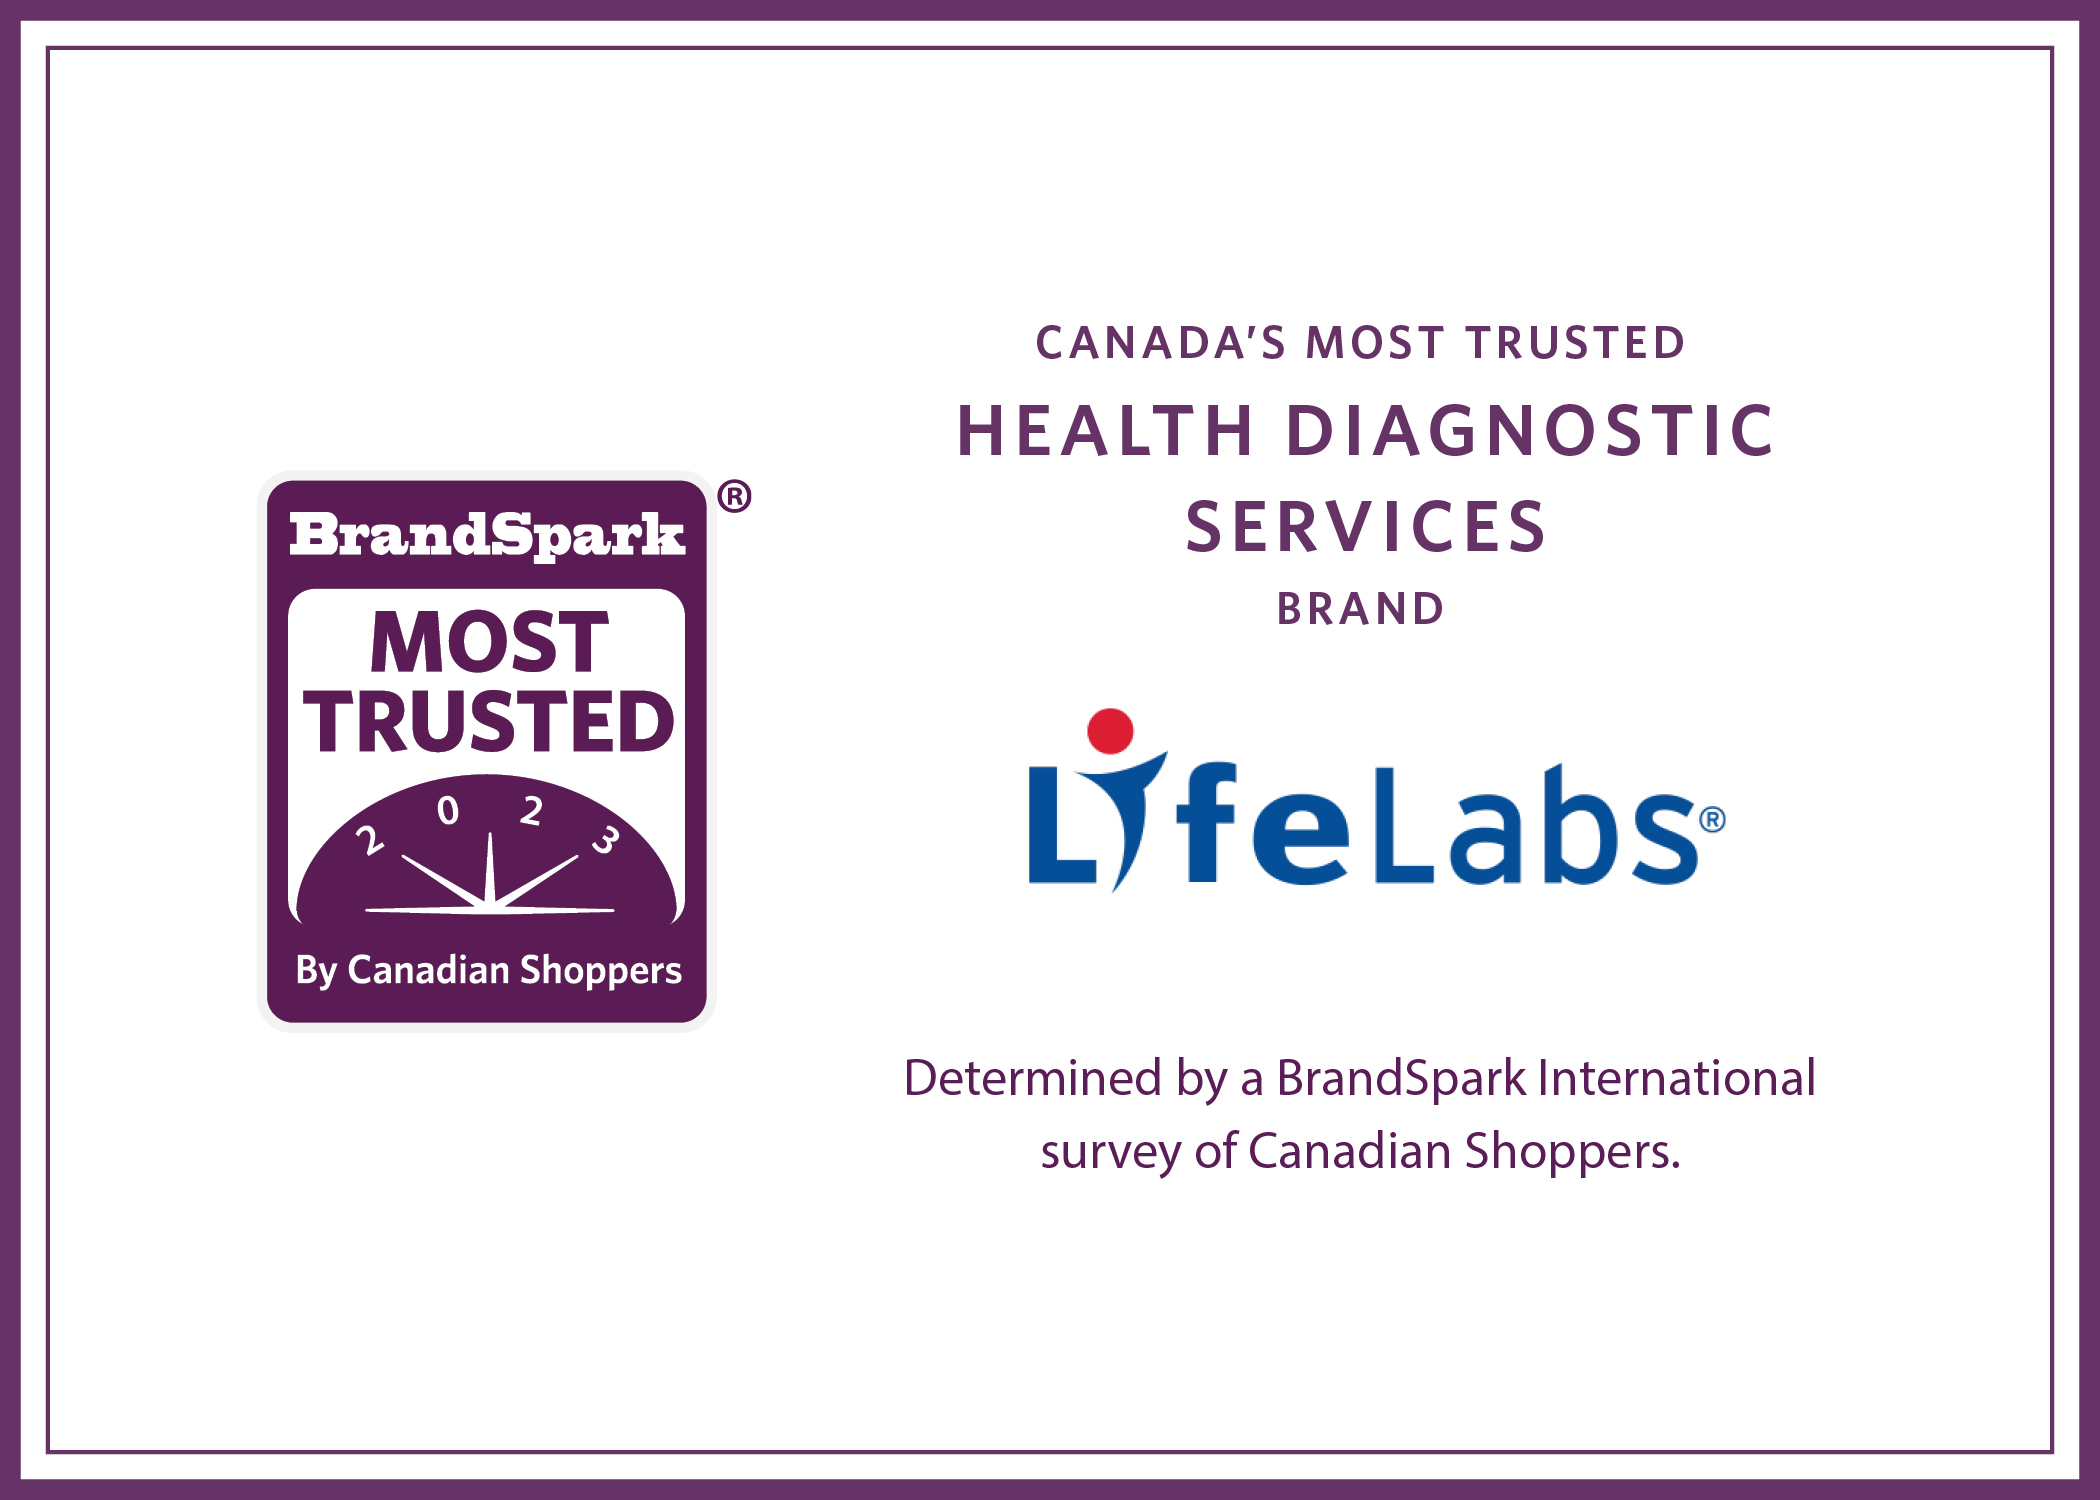 Canada's Most Trusted Health Diagnostic Service LifeLabs